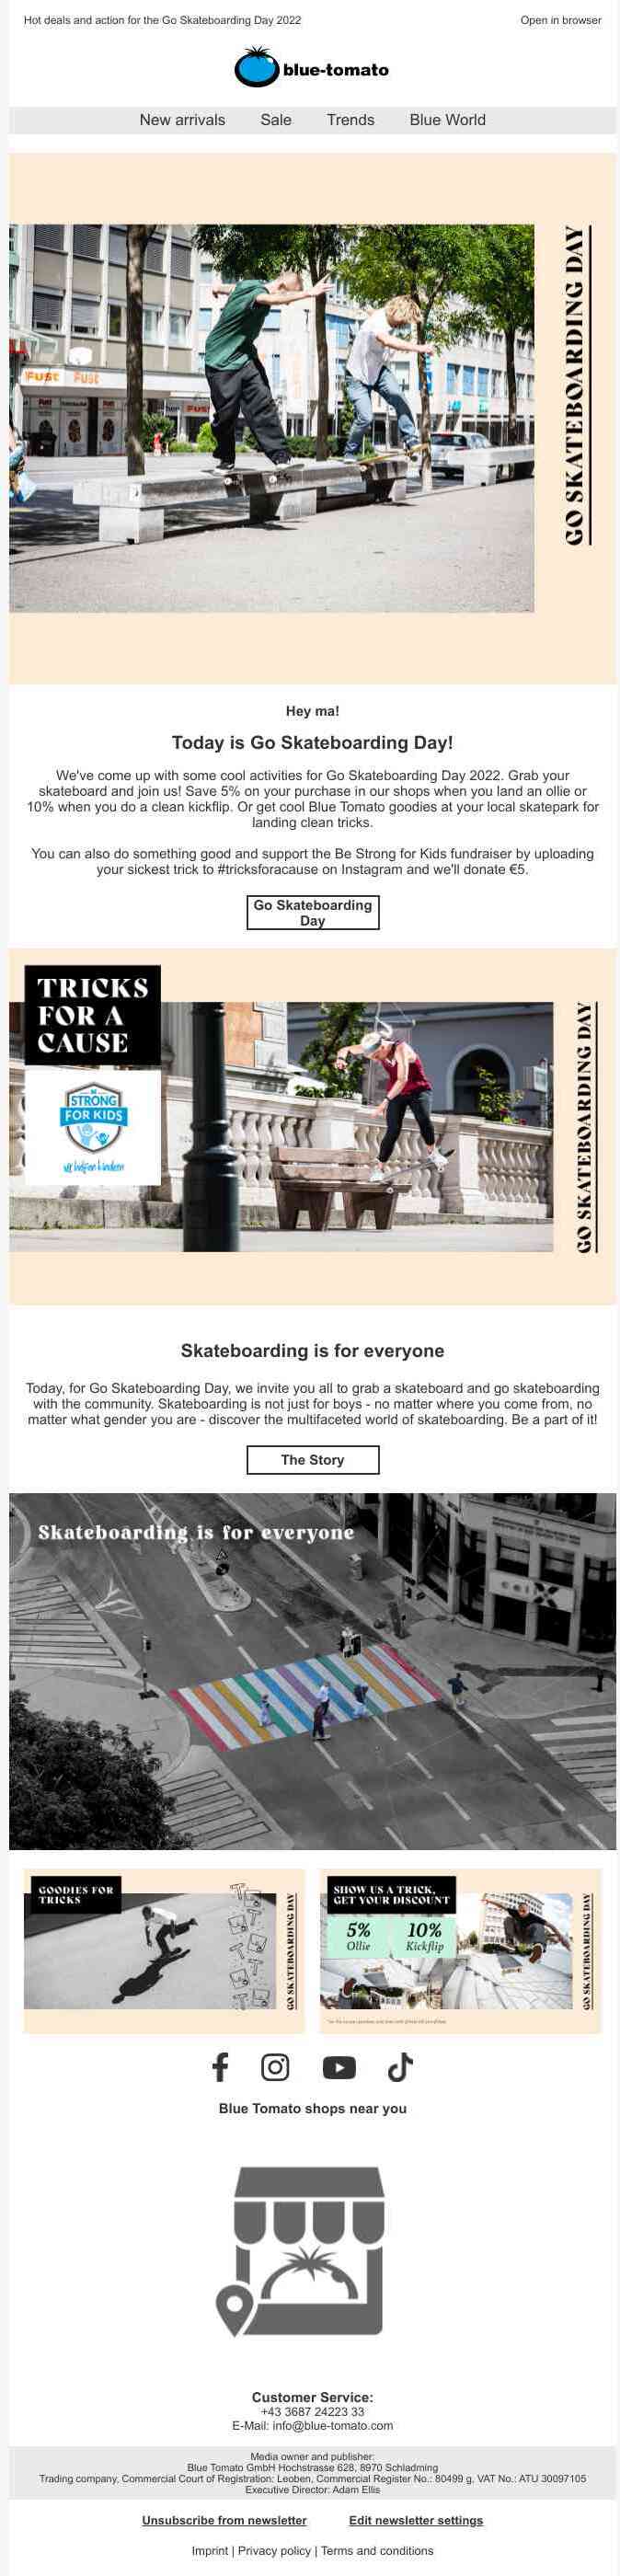 Ignore this mail and go skateboarding!